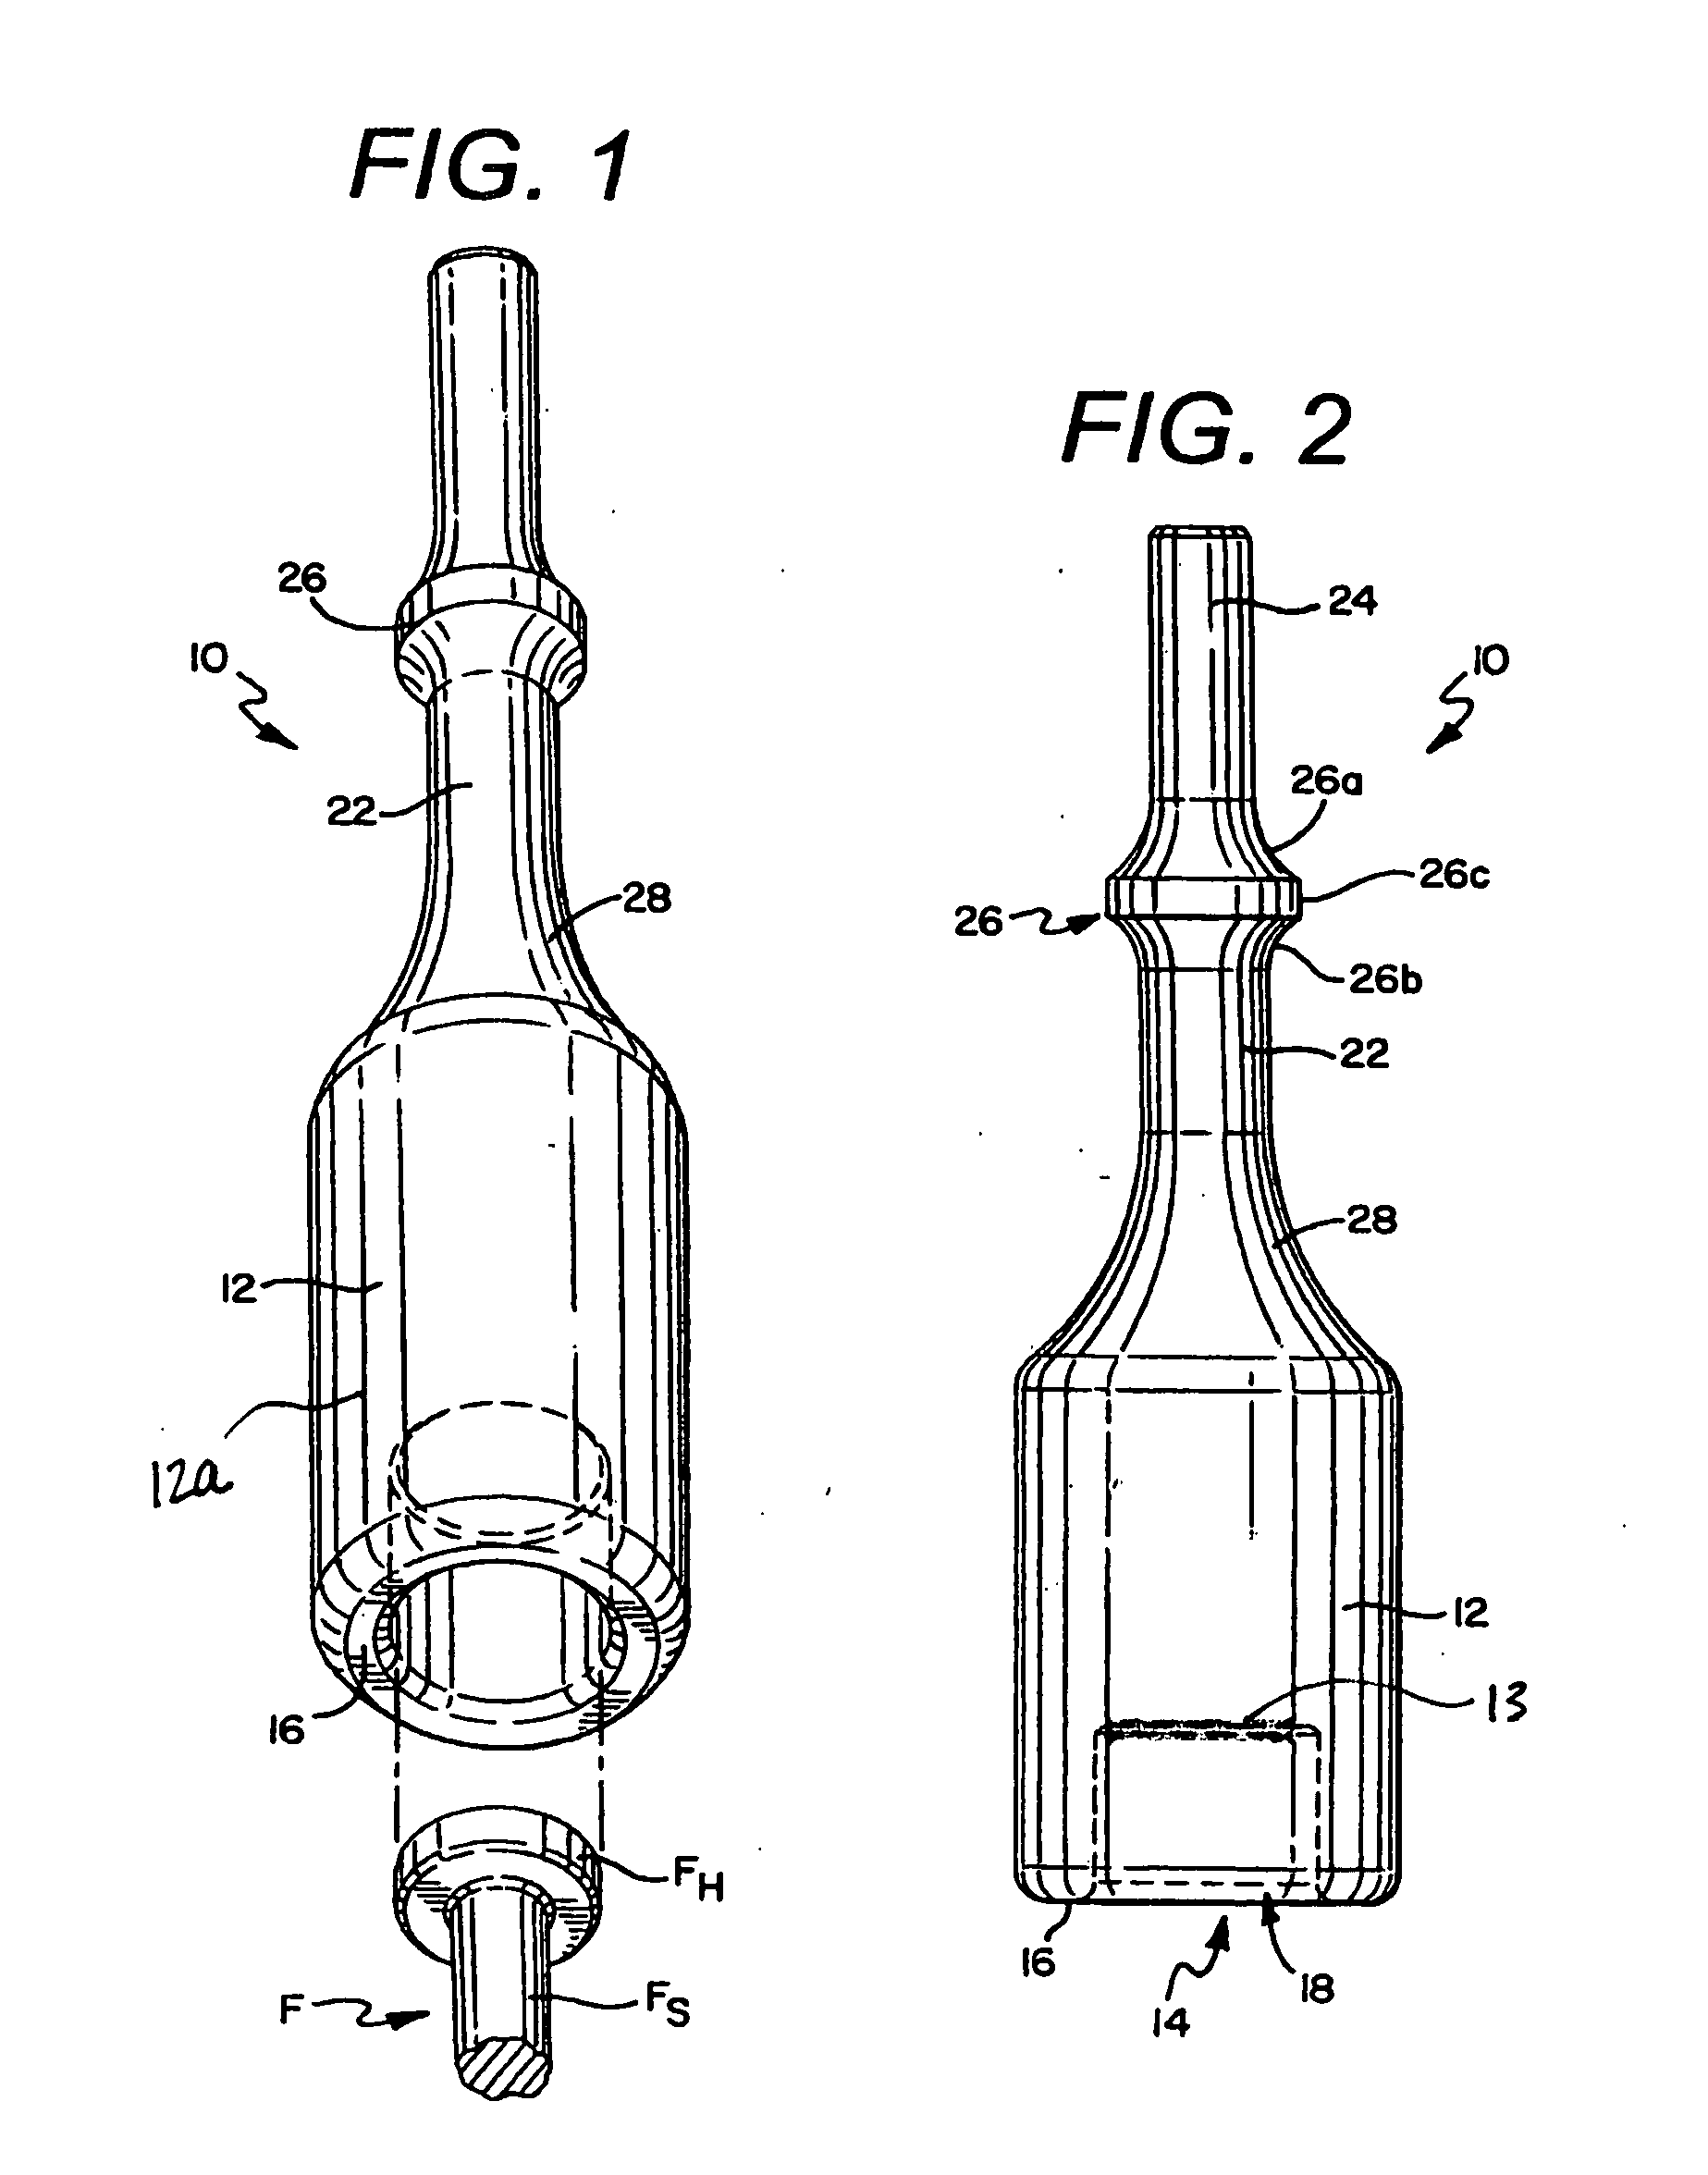 Tool bit for driving an elongated fastener